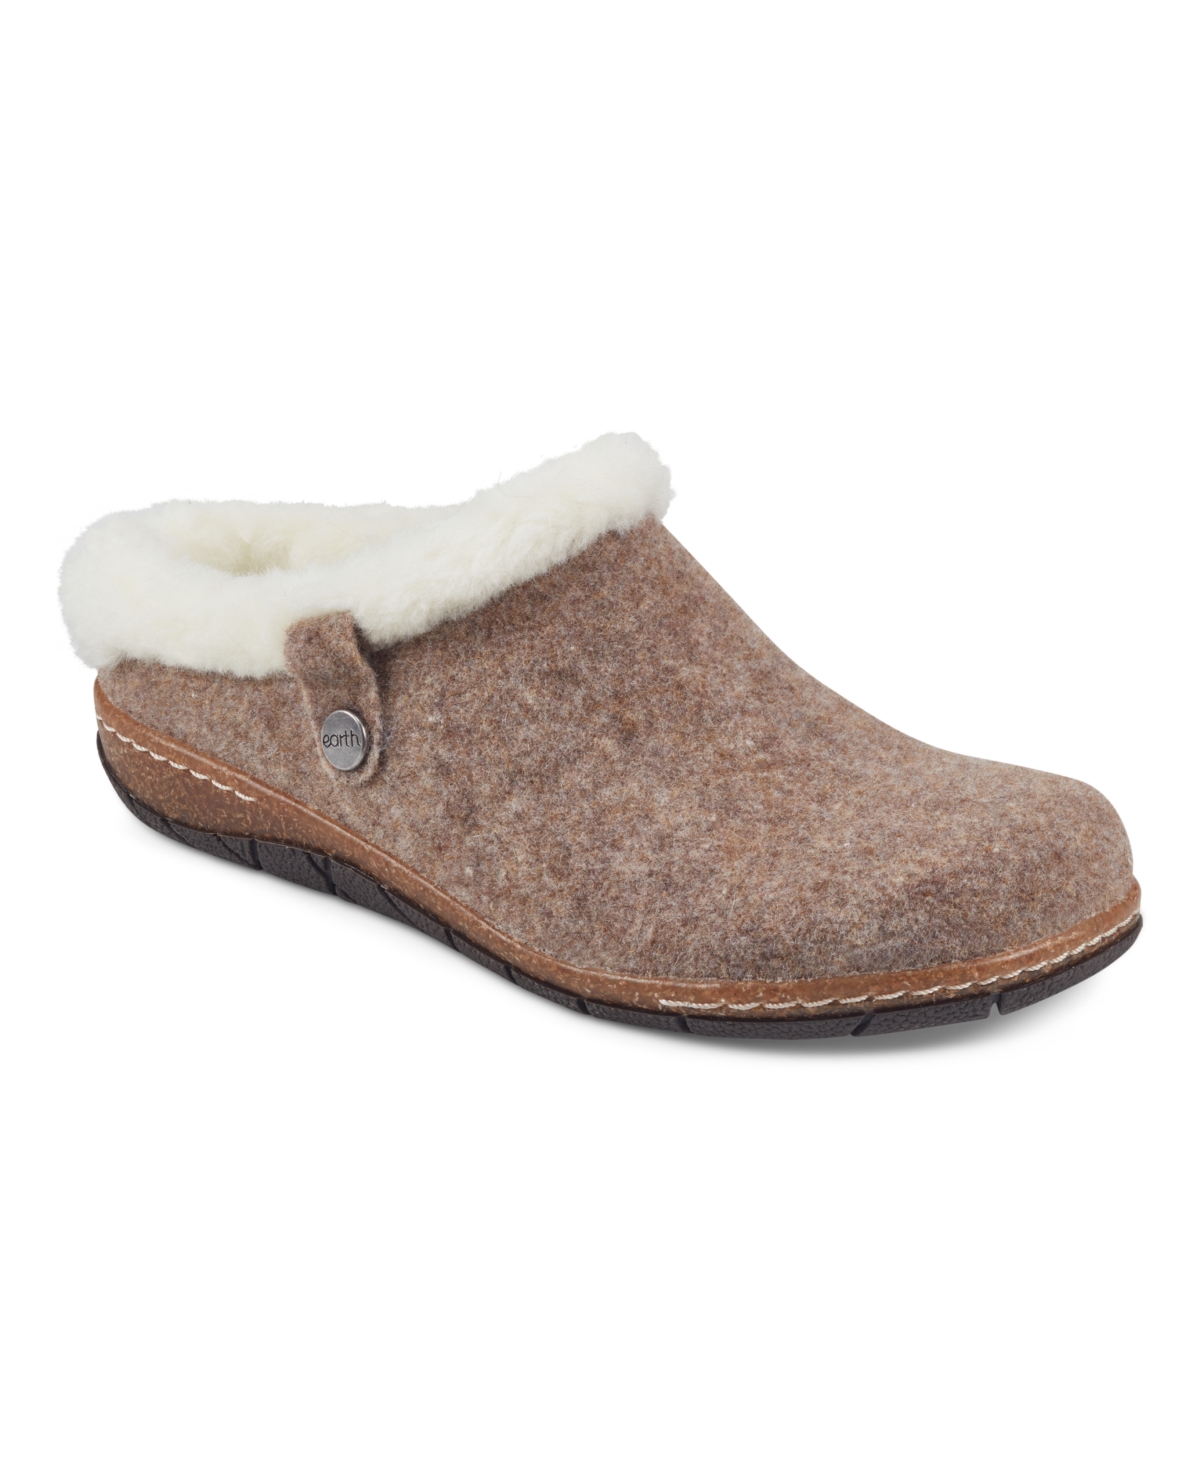 Earth Women's Elena Cold Weather Round Toe Casual Slip On Clogs In Light Brown Textile,faux Fur